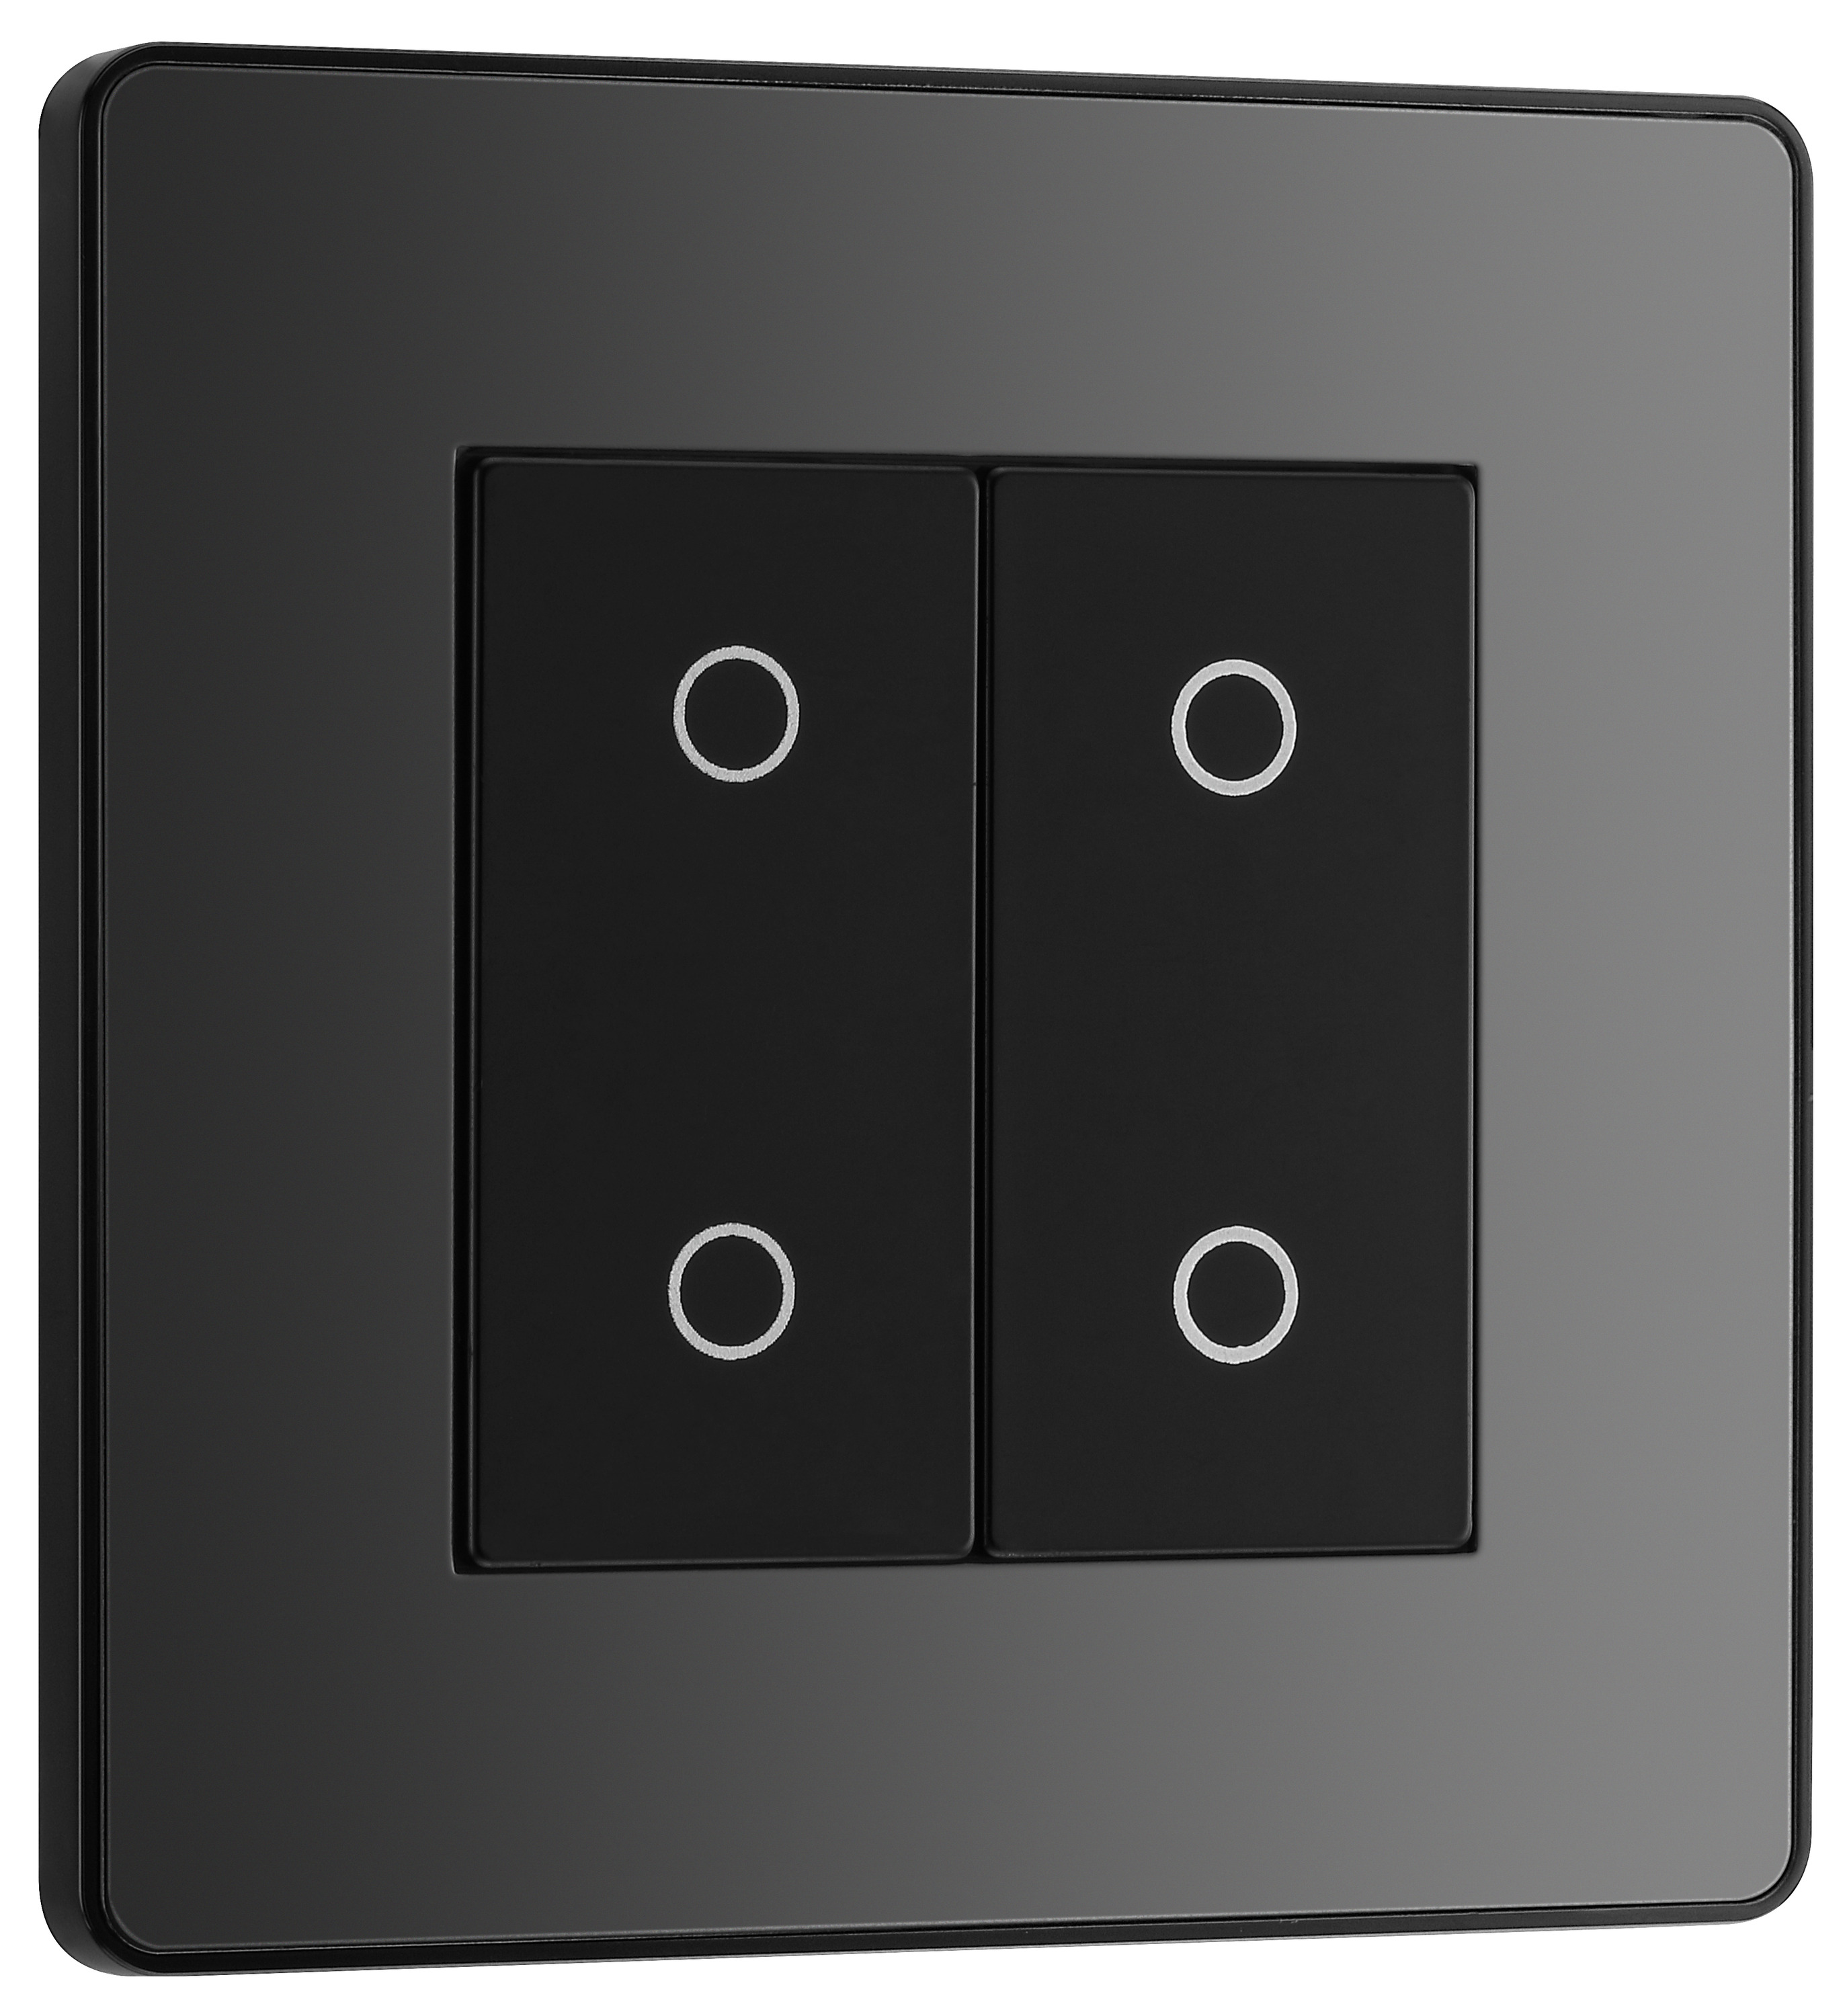 Image of BG Evolve Master Black Chrome 2 Way Double Touch Dimmer Switch - 200W